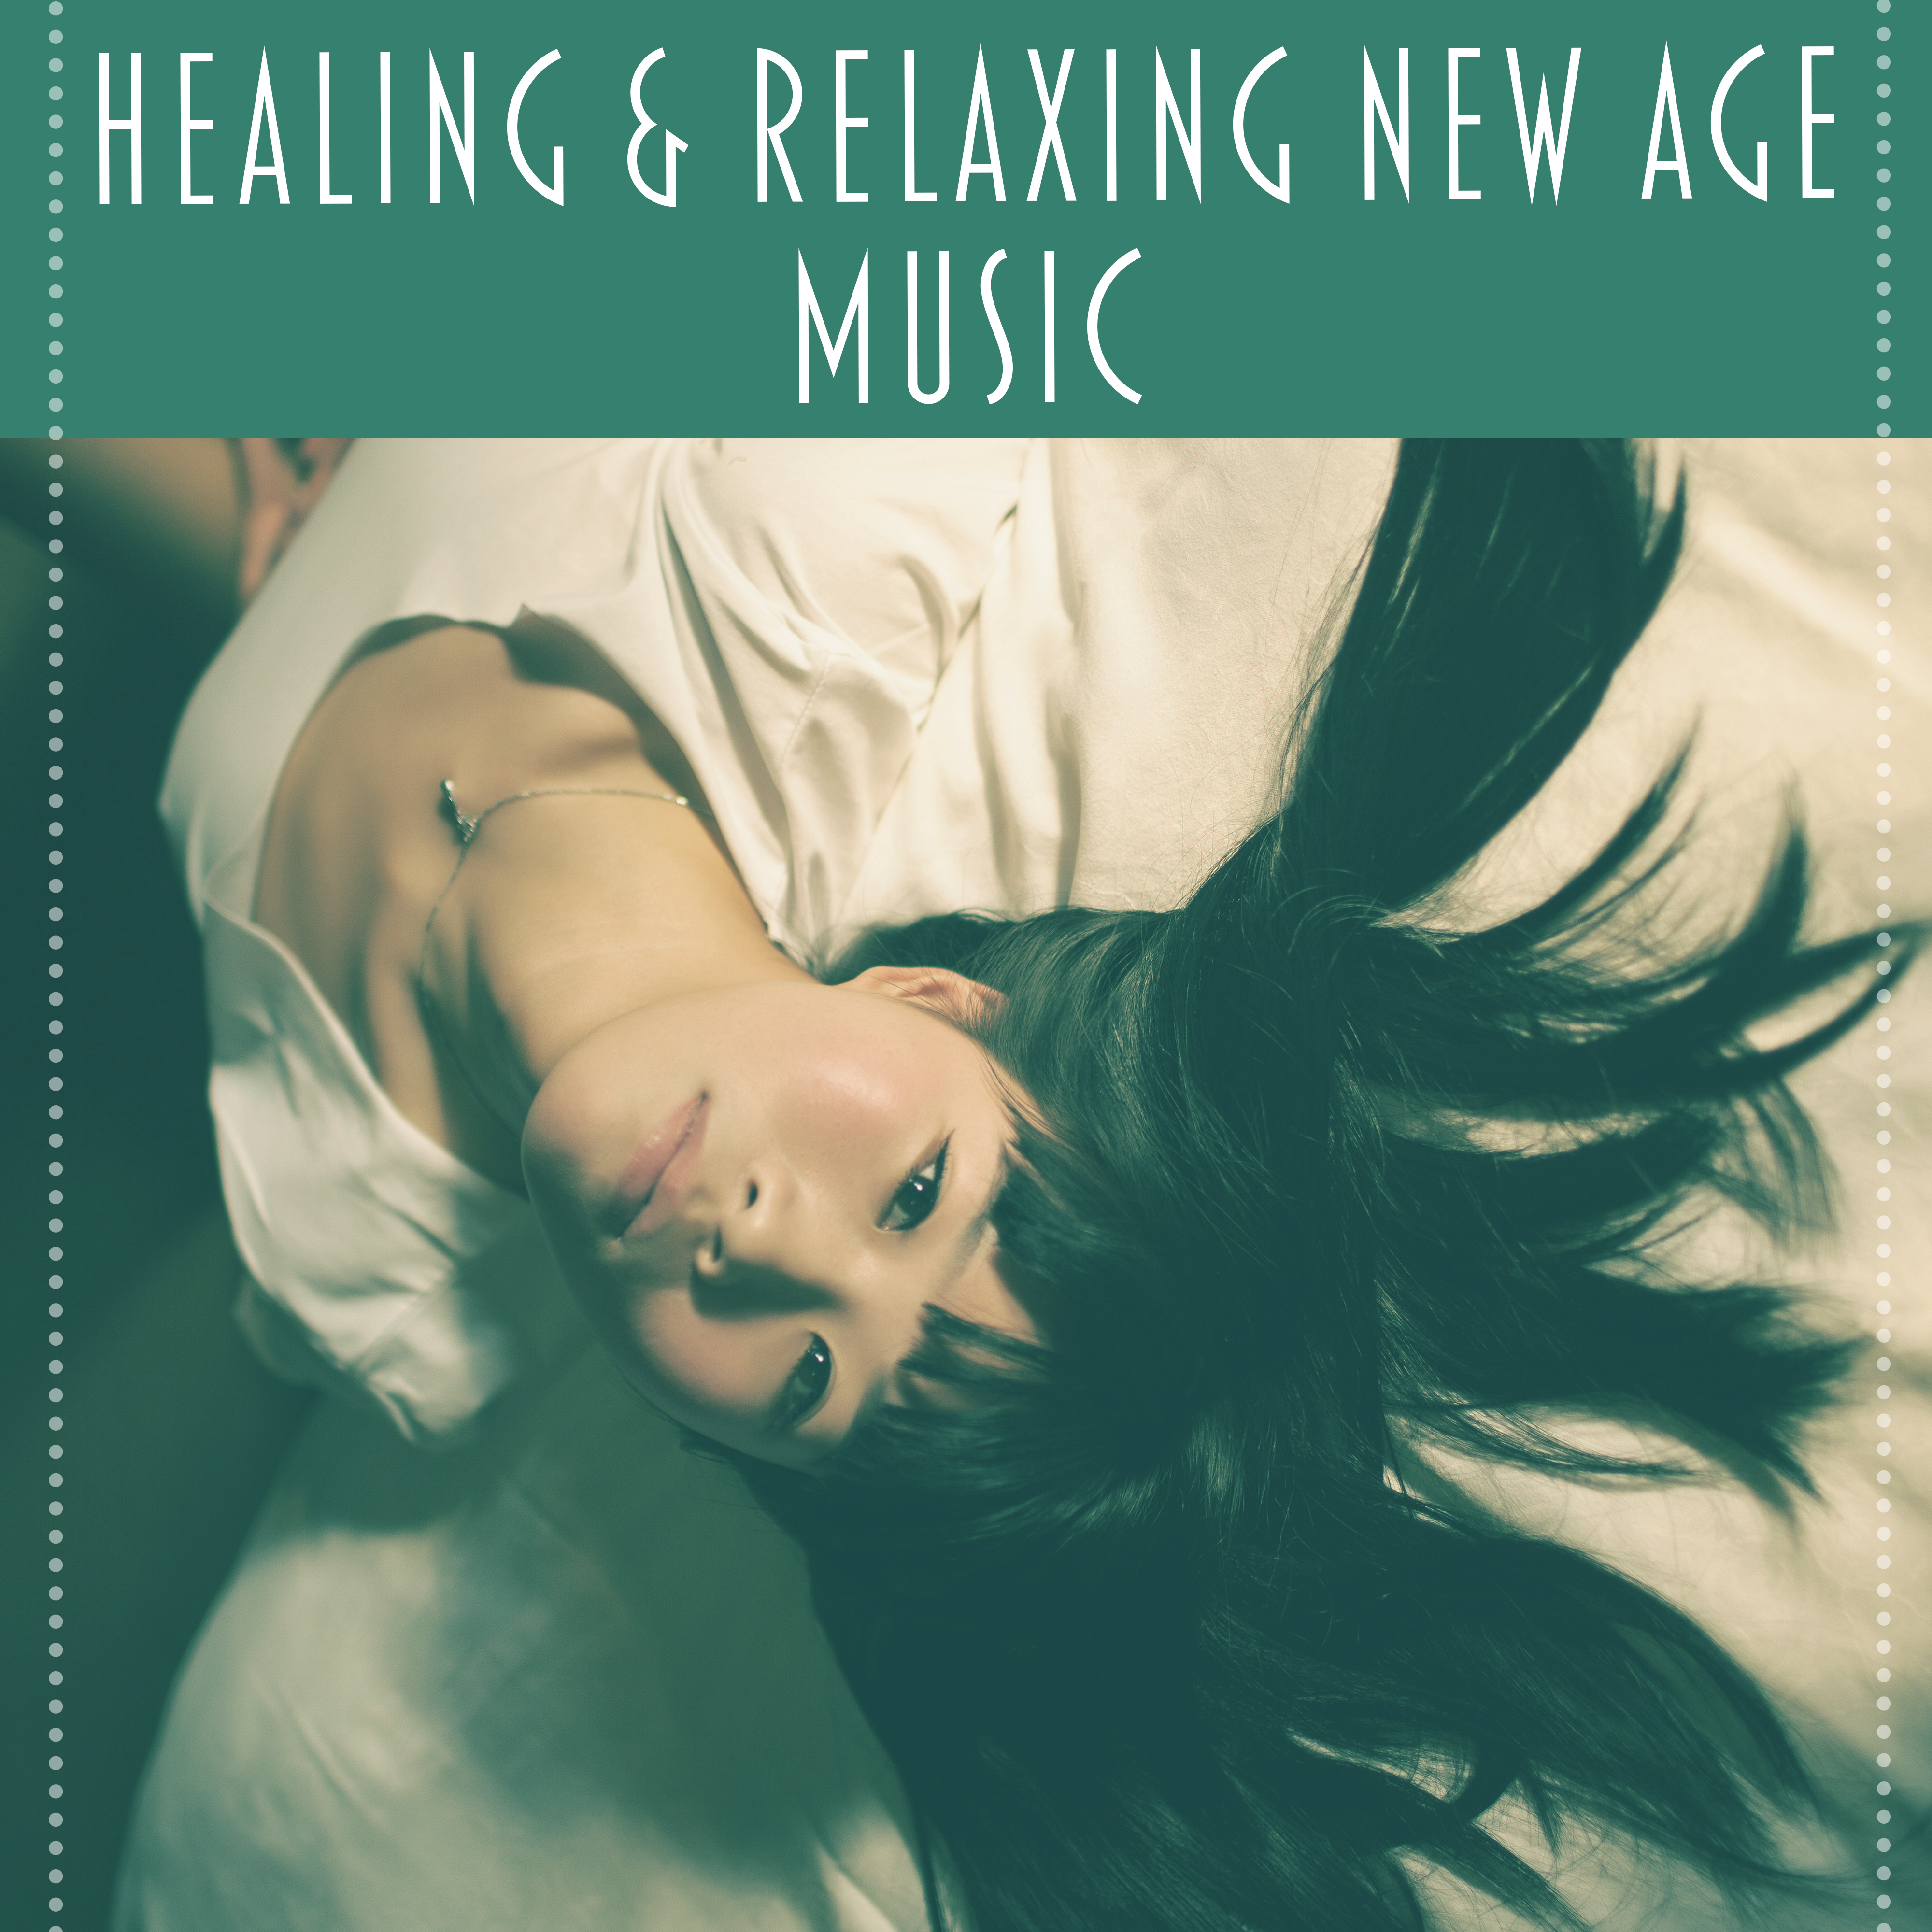 Healing & Relaxing New Age Music – Music to Rest, Healing Therapy, Soft Sounds to Relax, Nature Sounds